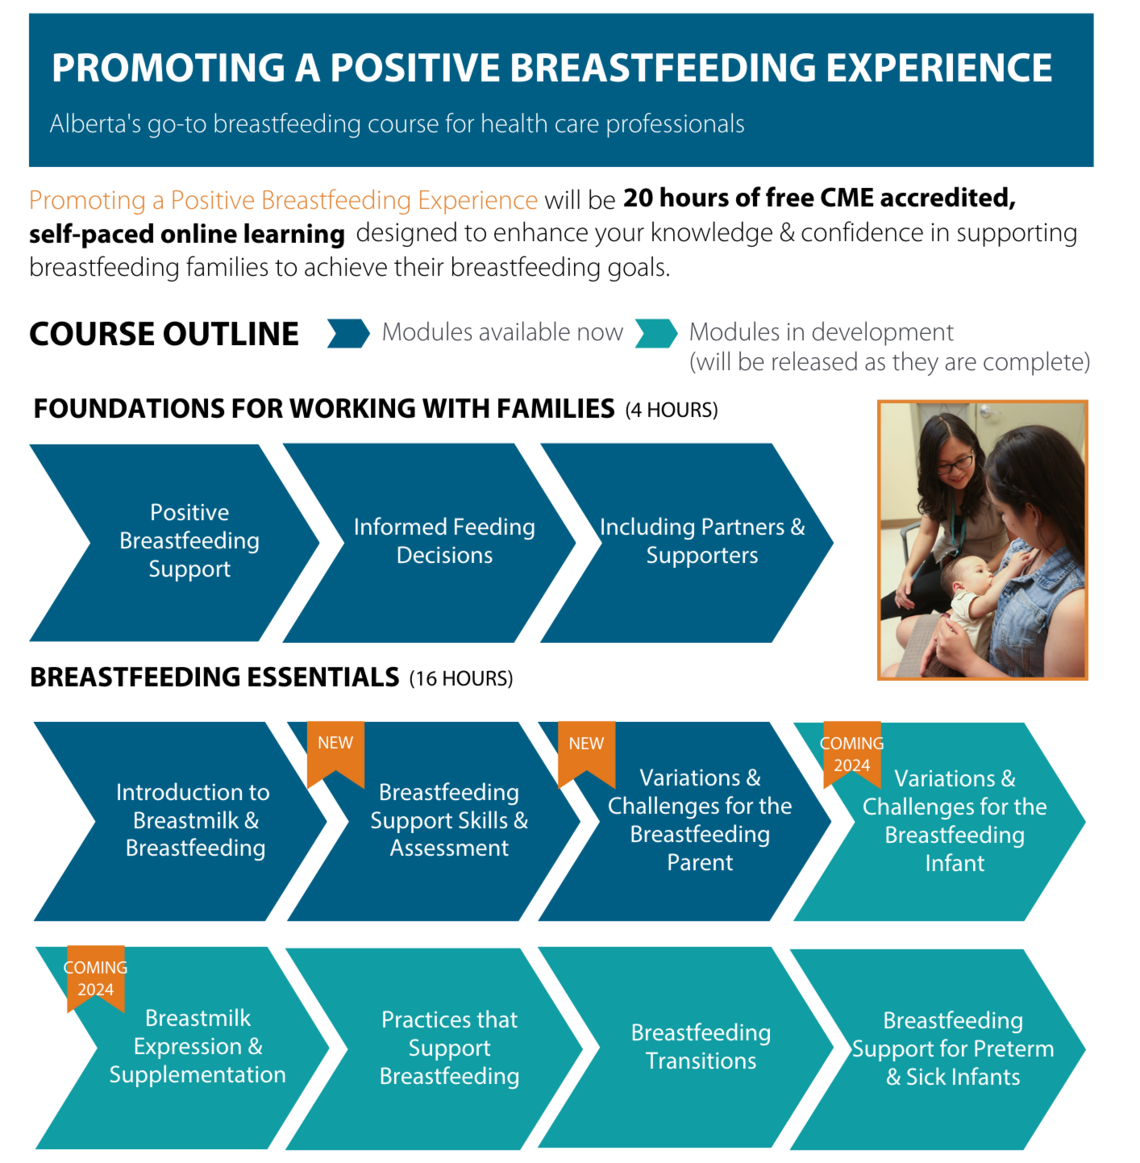 Promoting a Positive Breastfeeding Experience